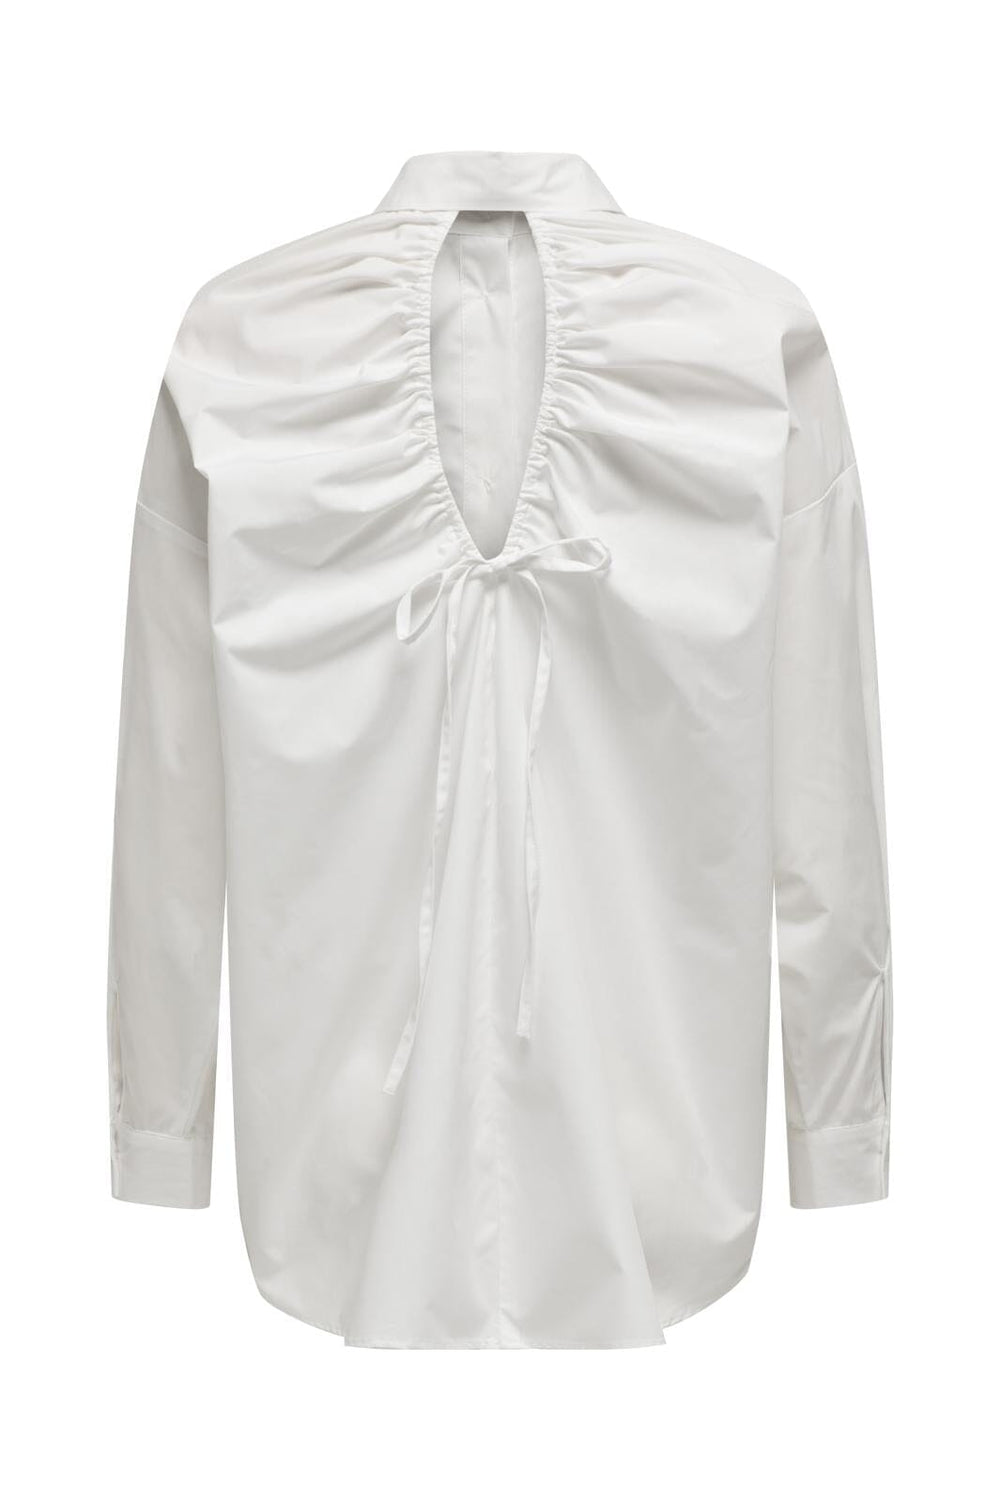 Only - Onlceline Cut Out Back Shirt - 4341391 Bright White